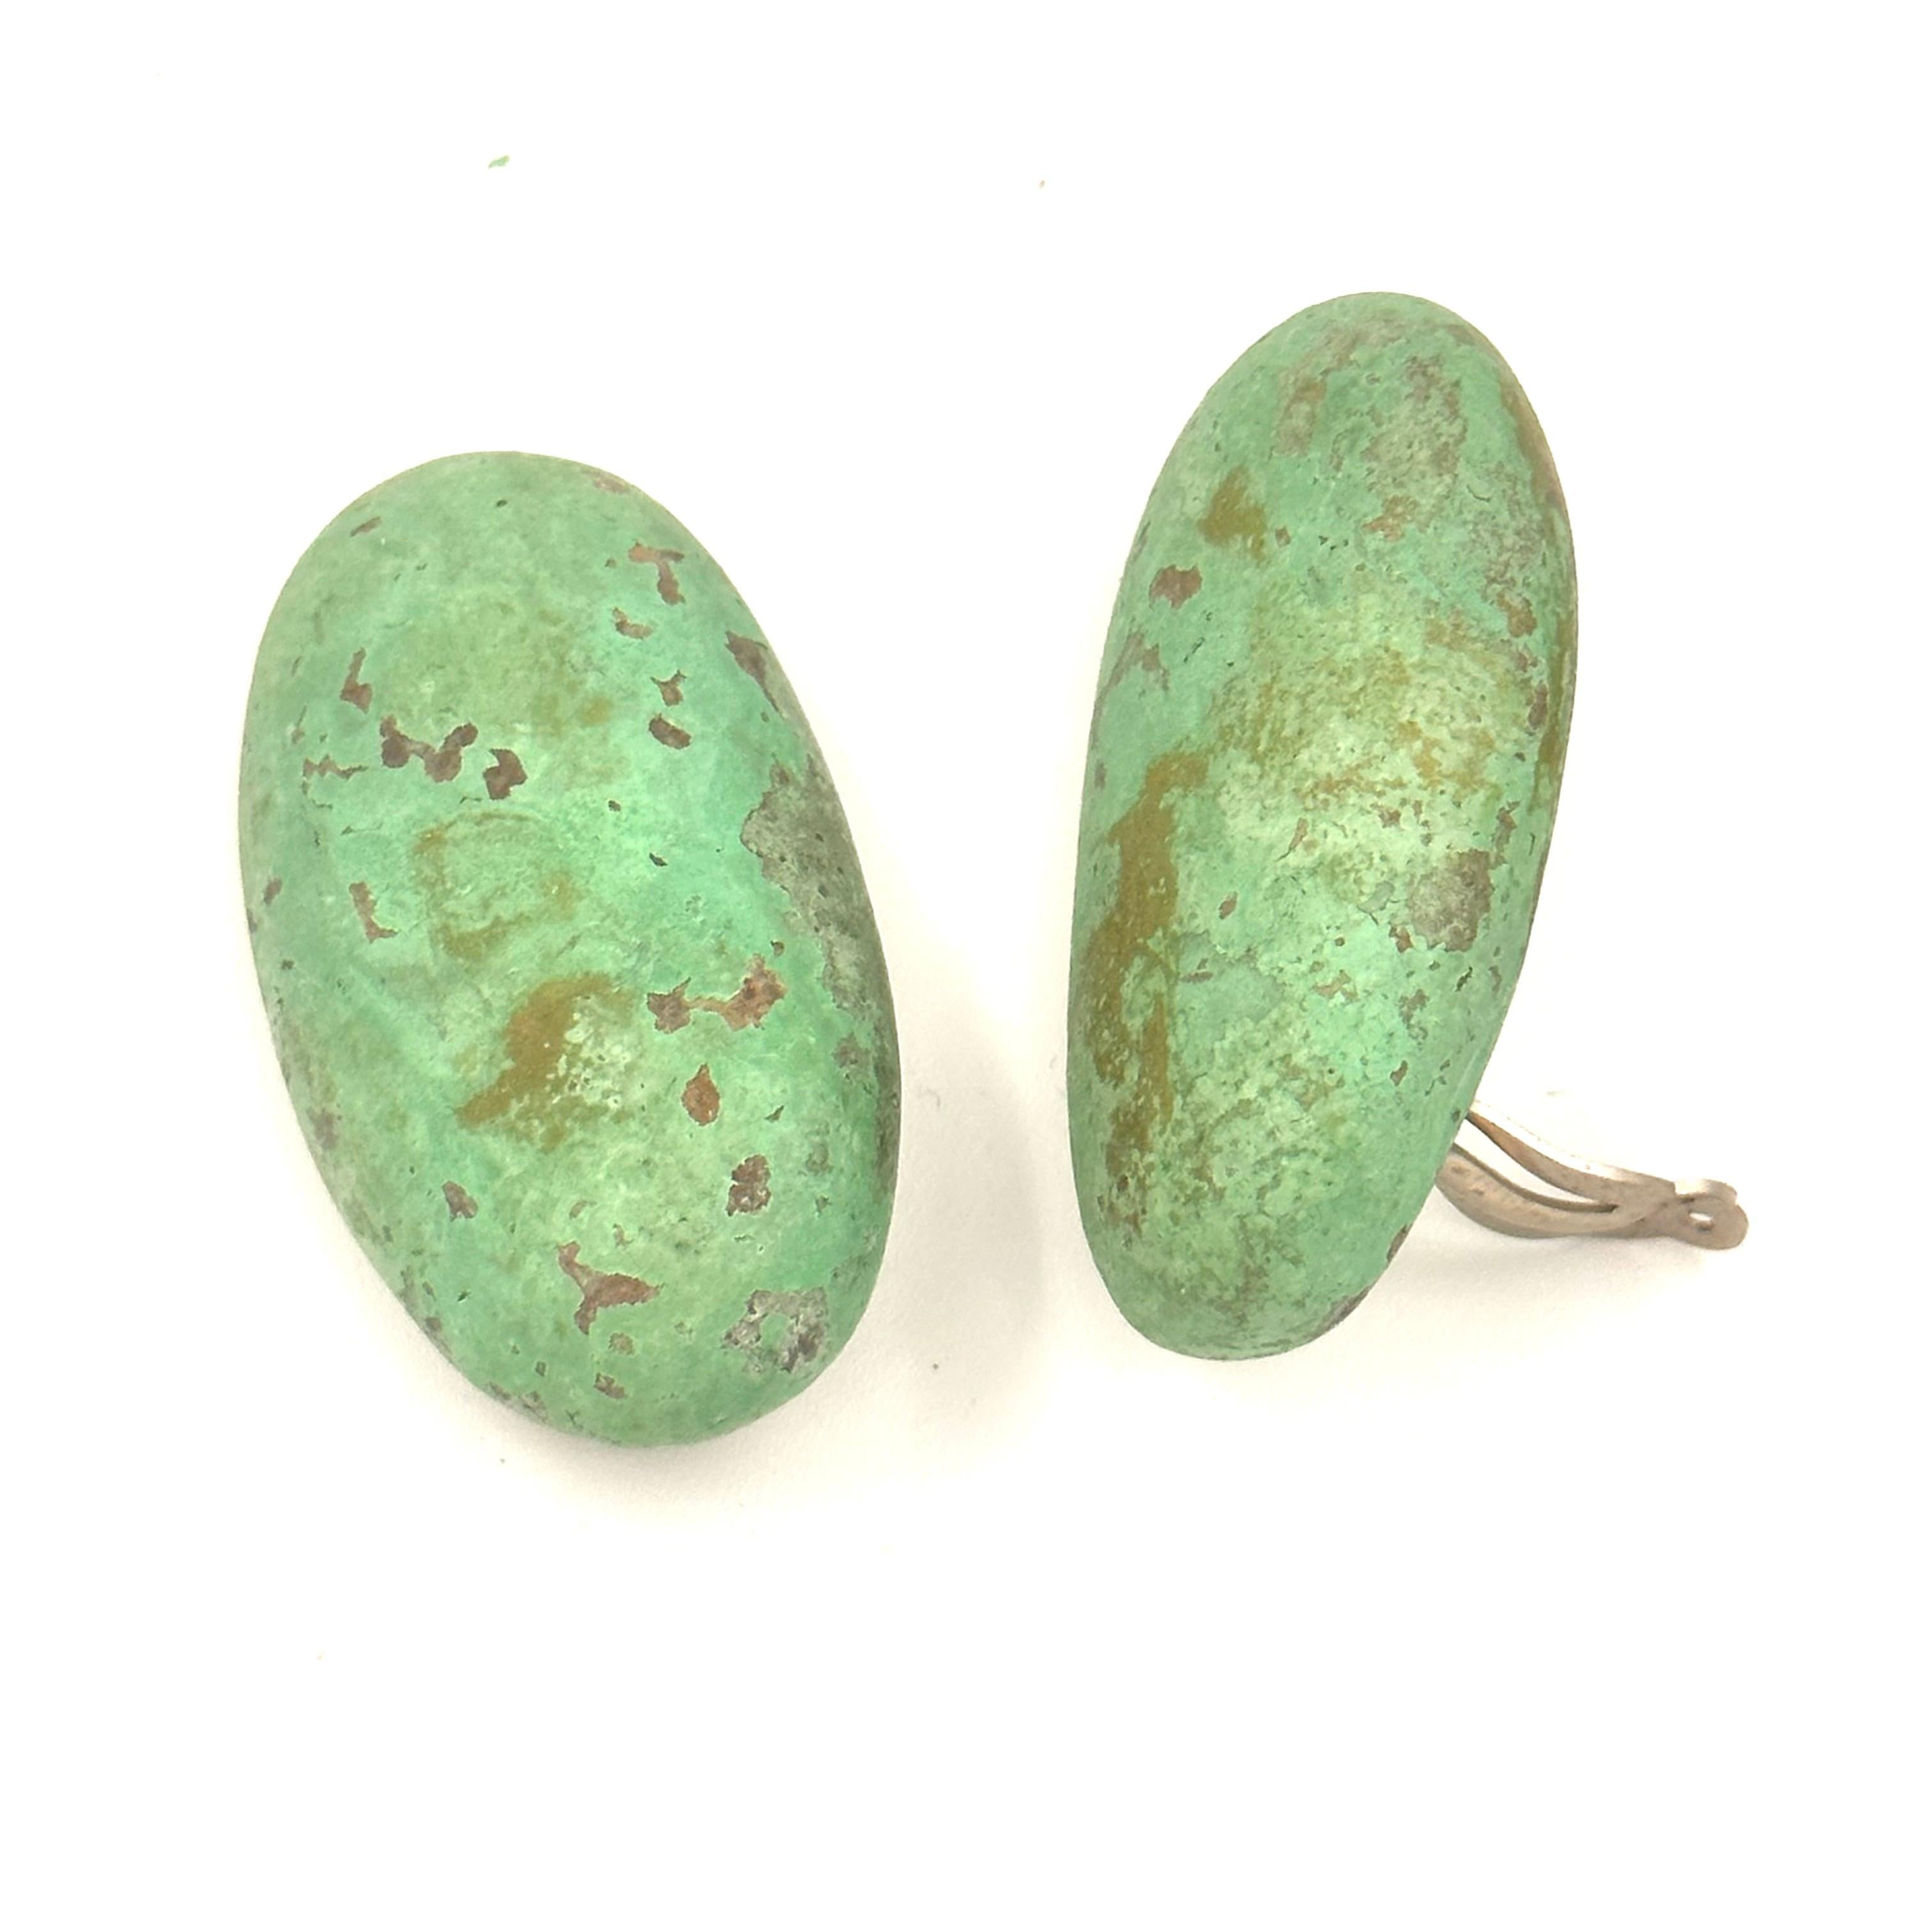 The Wabi Sabi theme of soft pebbles, gives way to many Verdigris earrings which were a ground breaking color for jewelry that Robert Lee Morris launched in 1981 with Calvin Klein. These oversized dramatic and very sculptural oxidized brass earrings